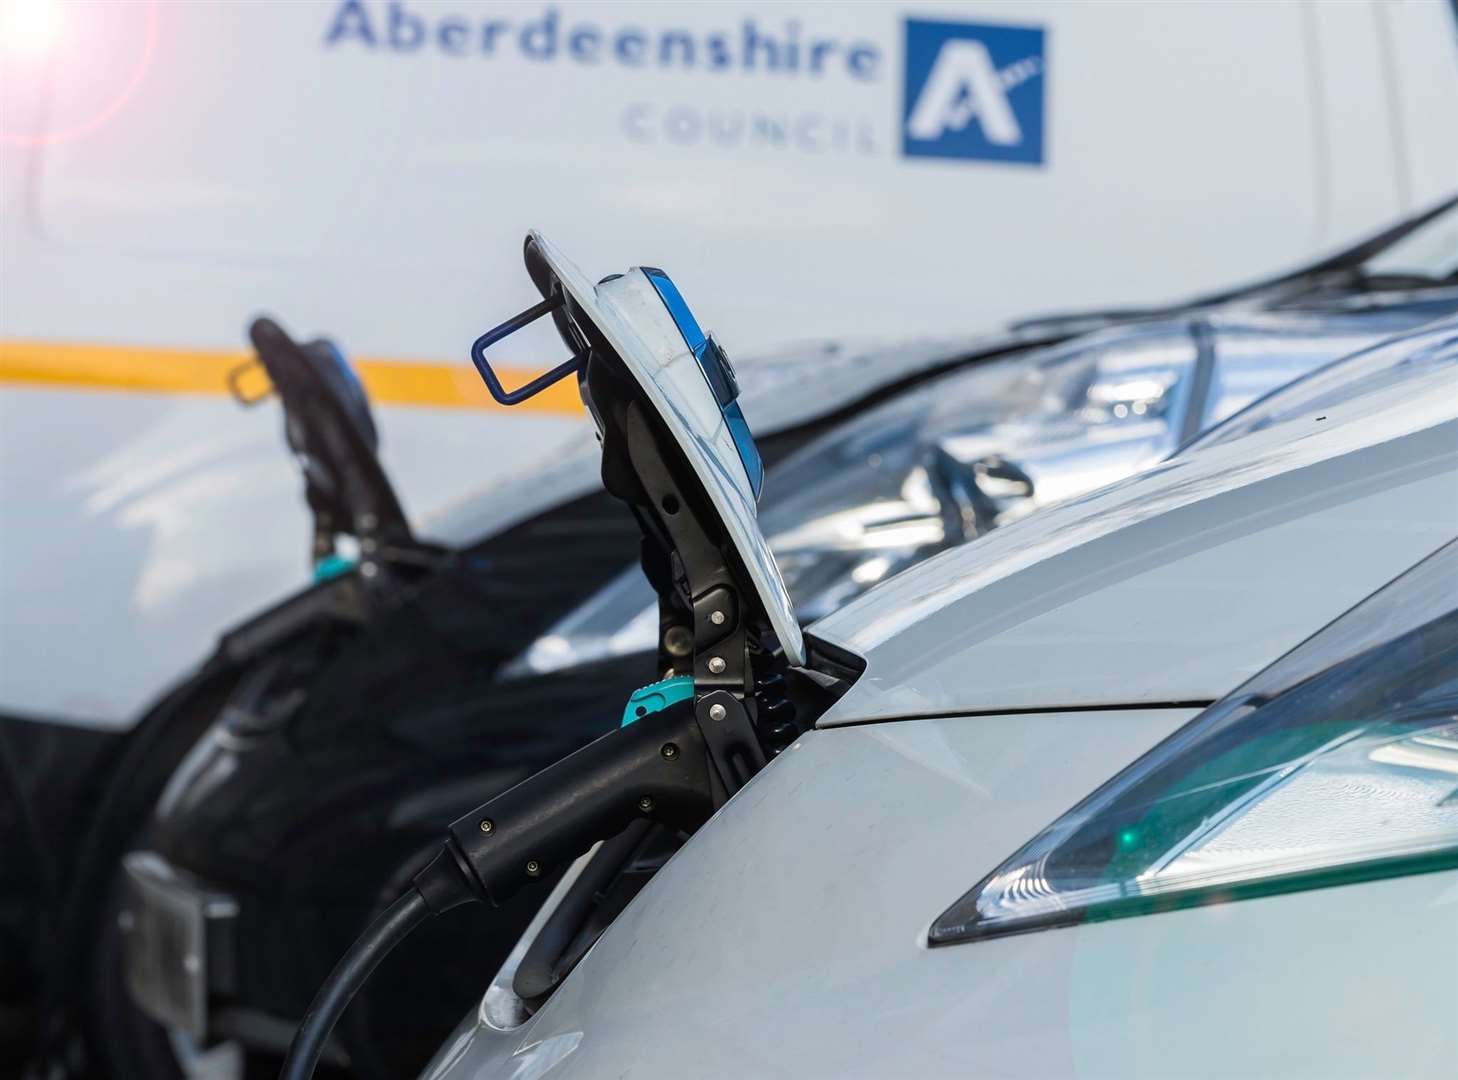 Investment in the north-east's charging point has come under scrutiny